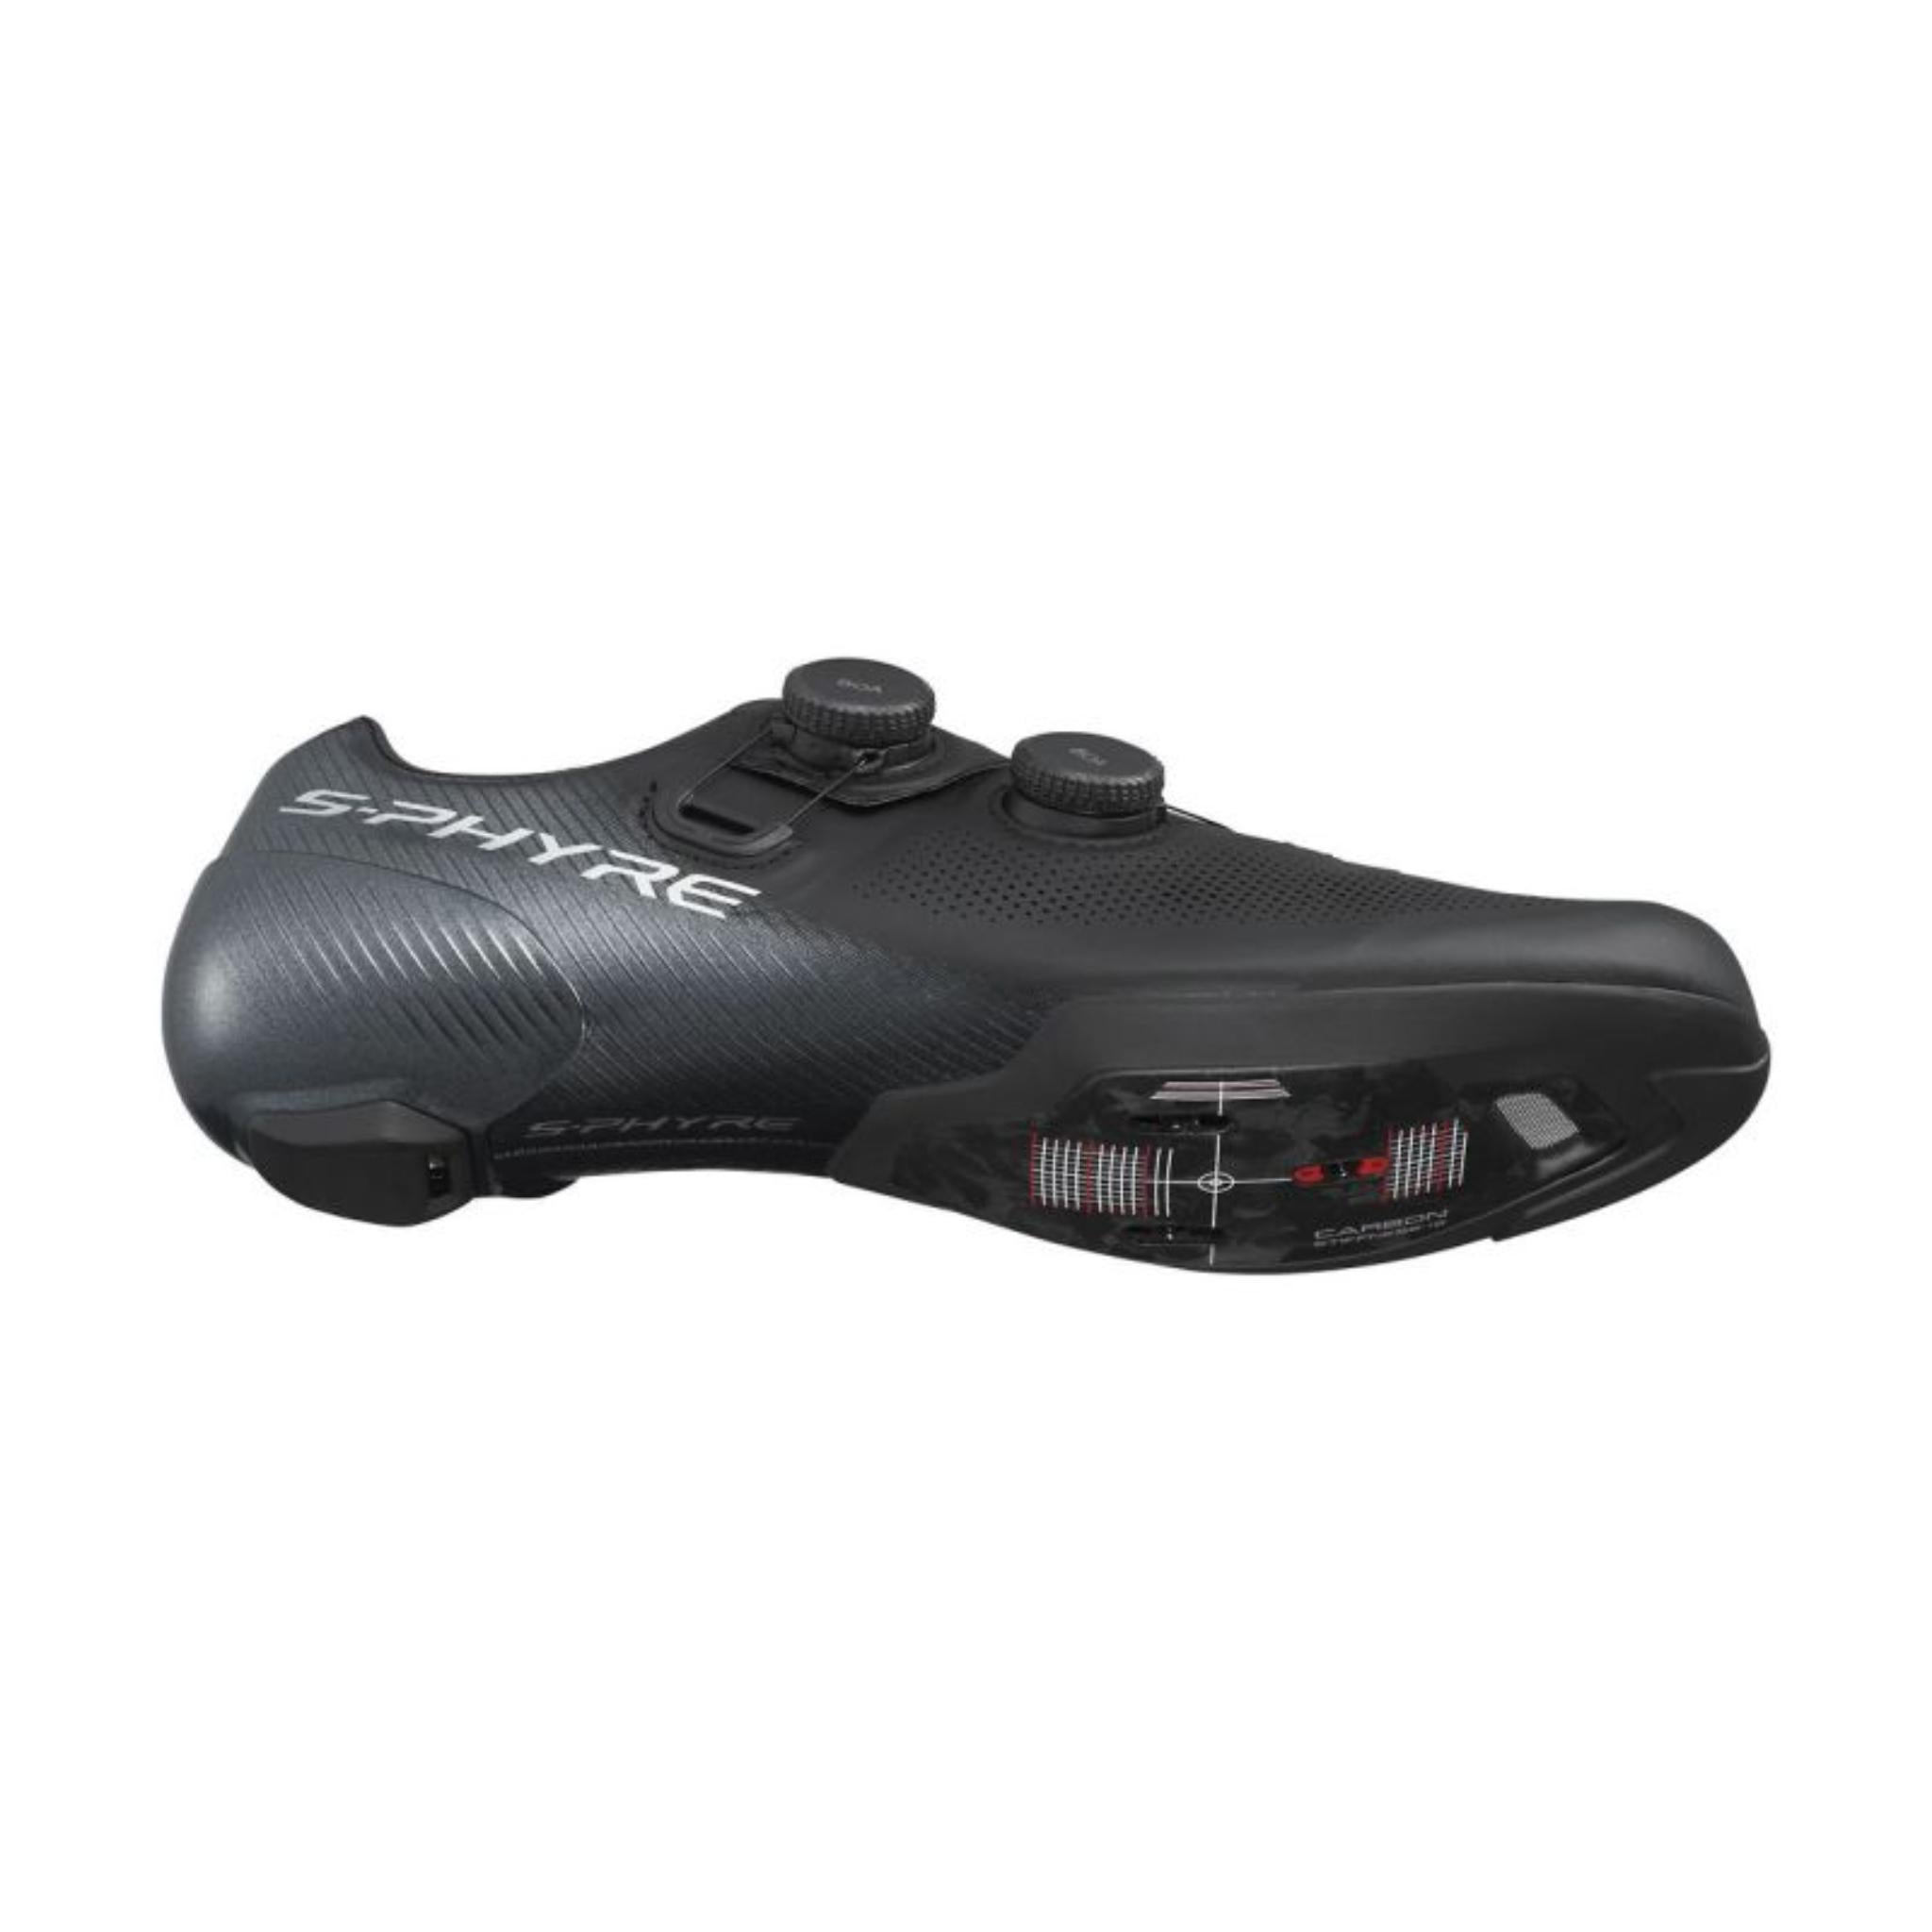 Shimano S-Phyre RC9 (RC903) Road Cycling Shoes